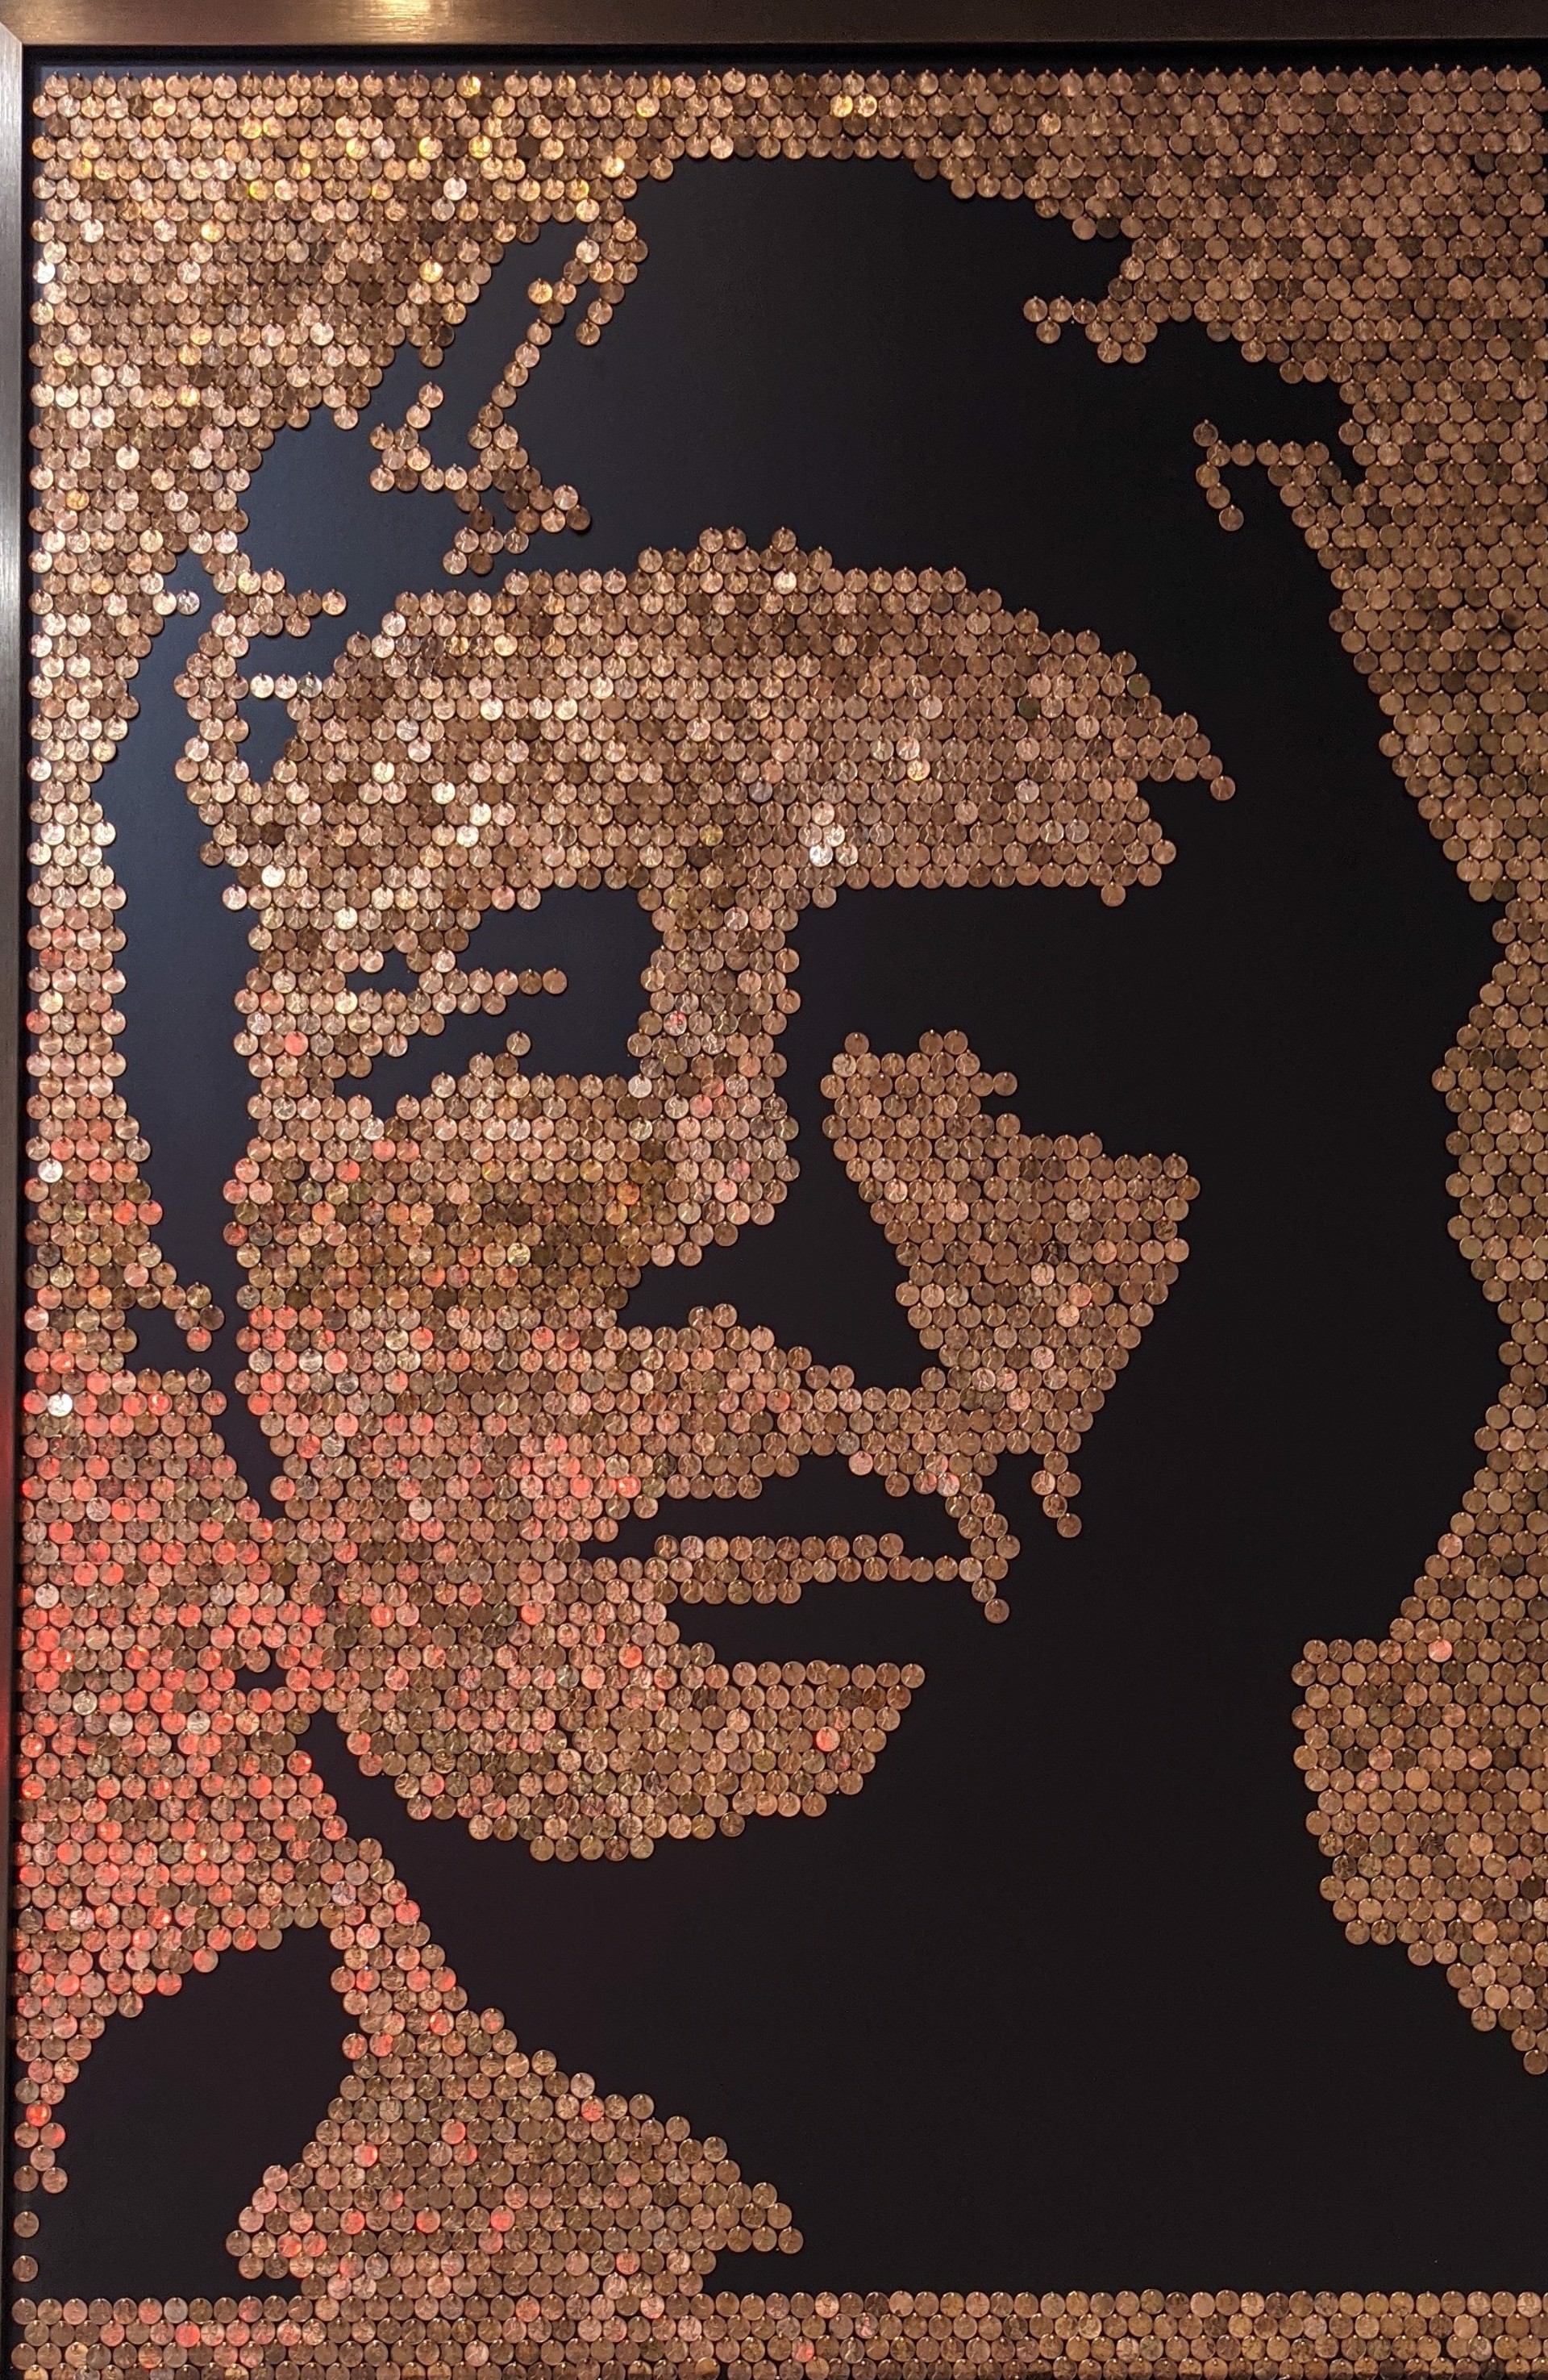 Penny Face "James Dean" by "Coins & Sequins On Canvas" by Efi Mashiah